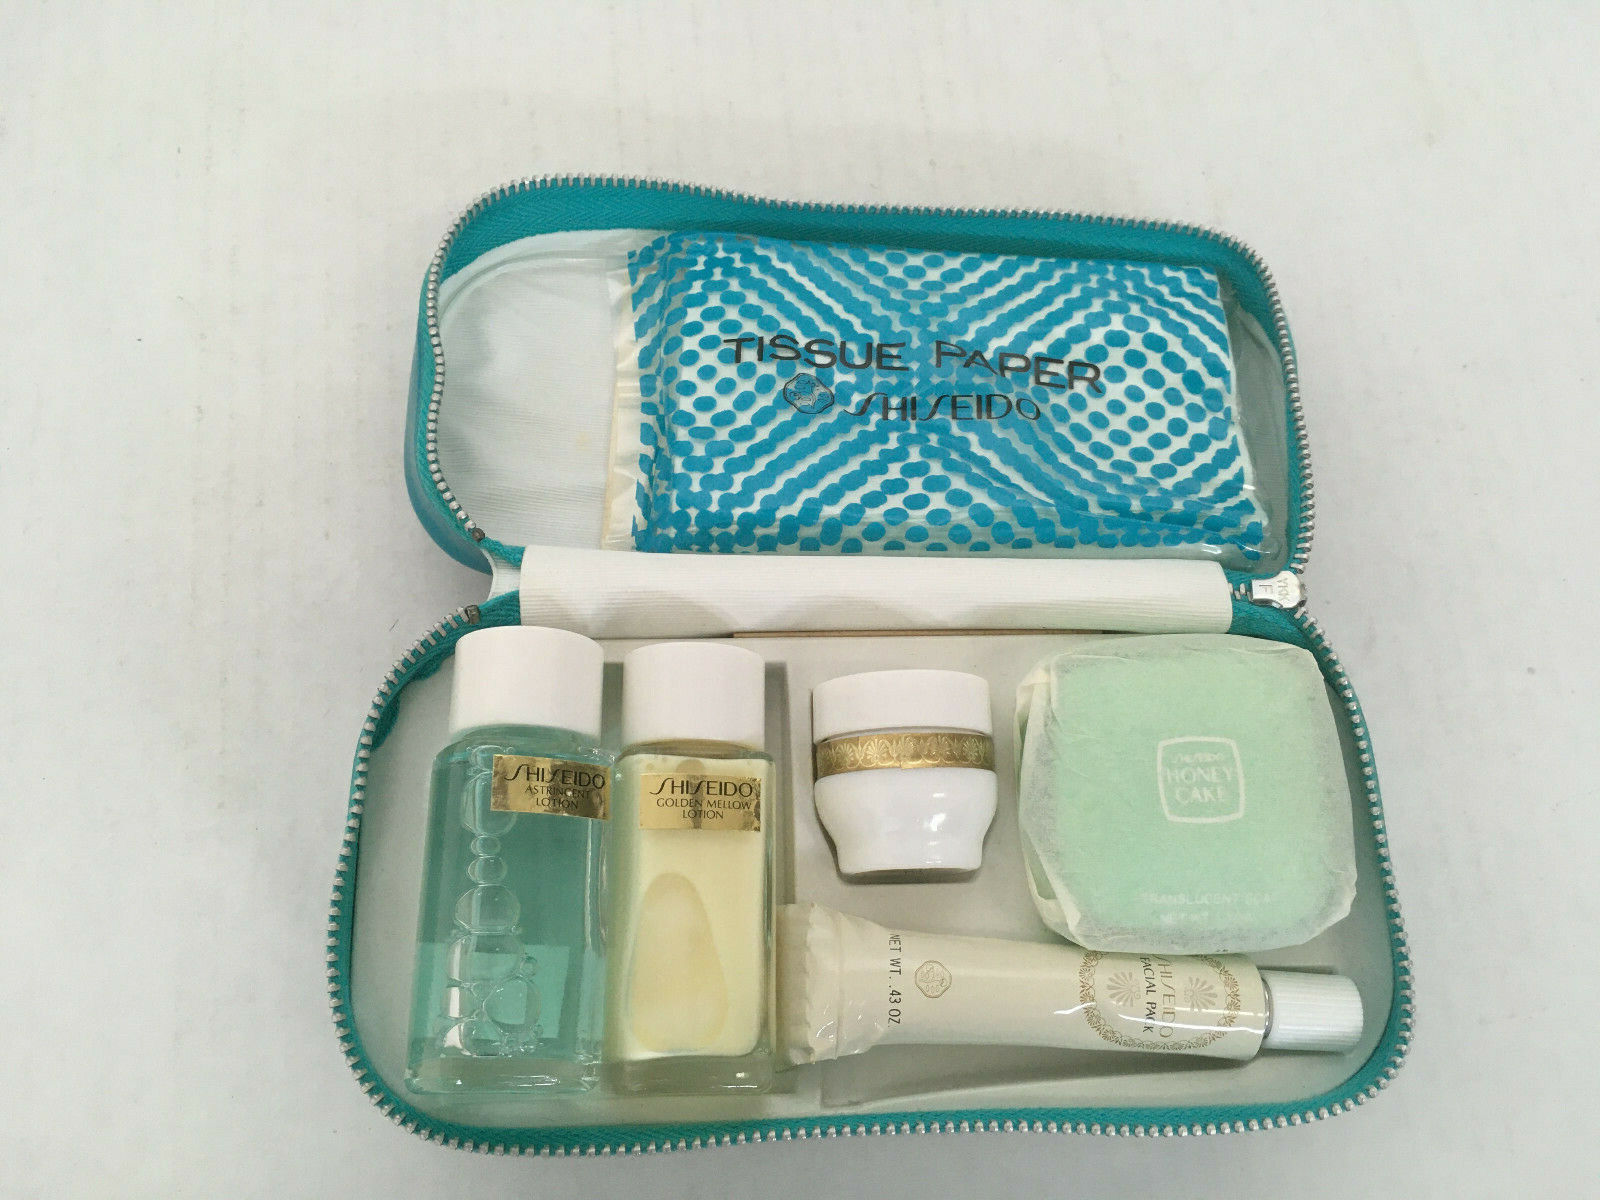 Primary image for Vintage shiseido face care products set kit in blue container with metal zipper